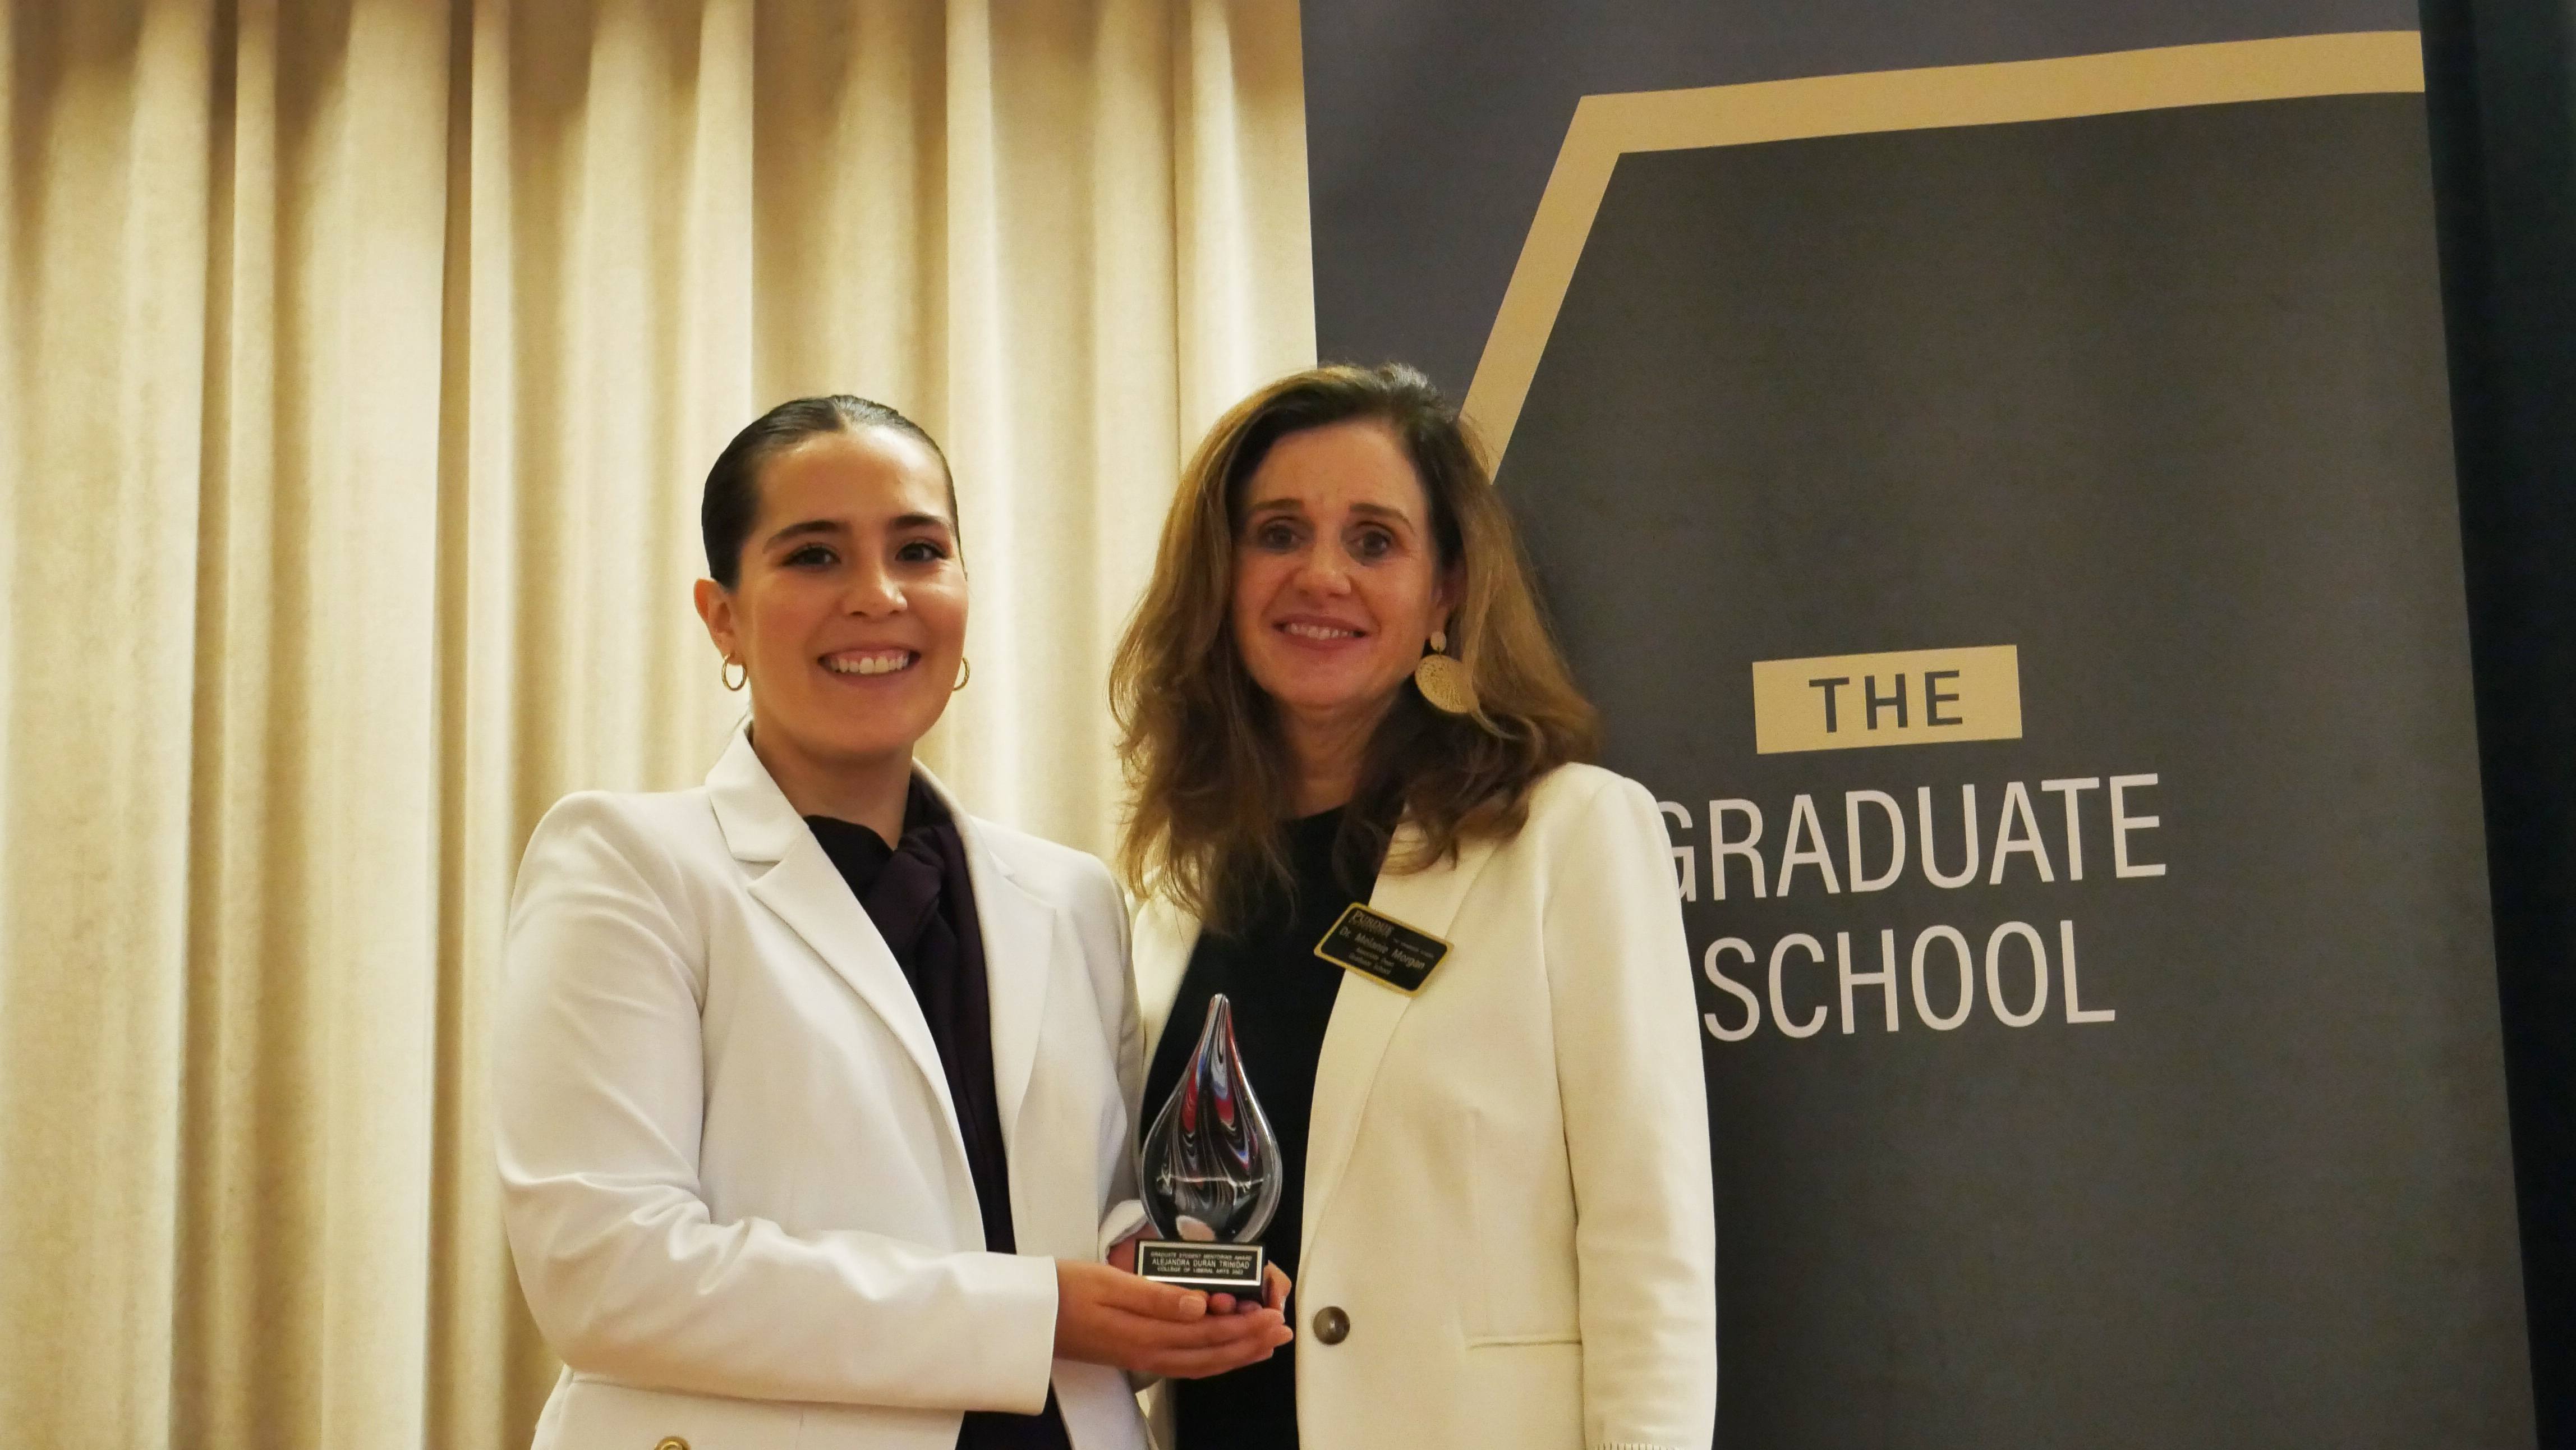 Alejandra Durán Trinidad (left), a Ph.D. Student in the Brian Lamb School of Communication and winner of the 2022 Mentoring Award for Graduate Students poses with her mentor, Dr. Melanie Morgan (right)